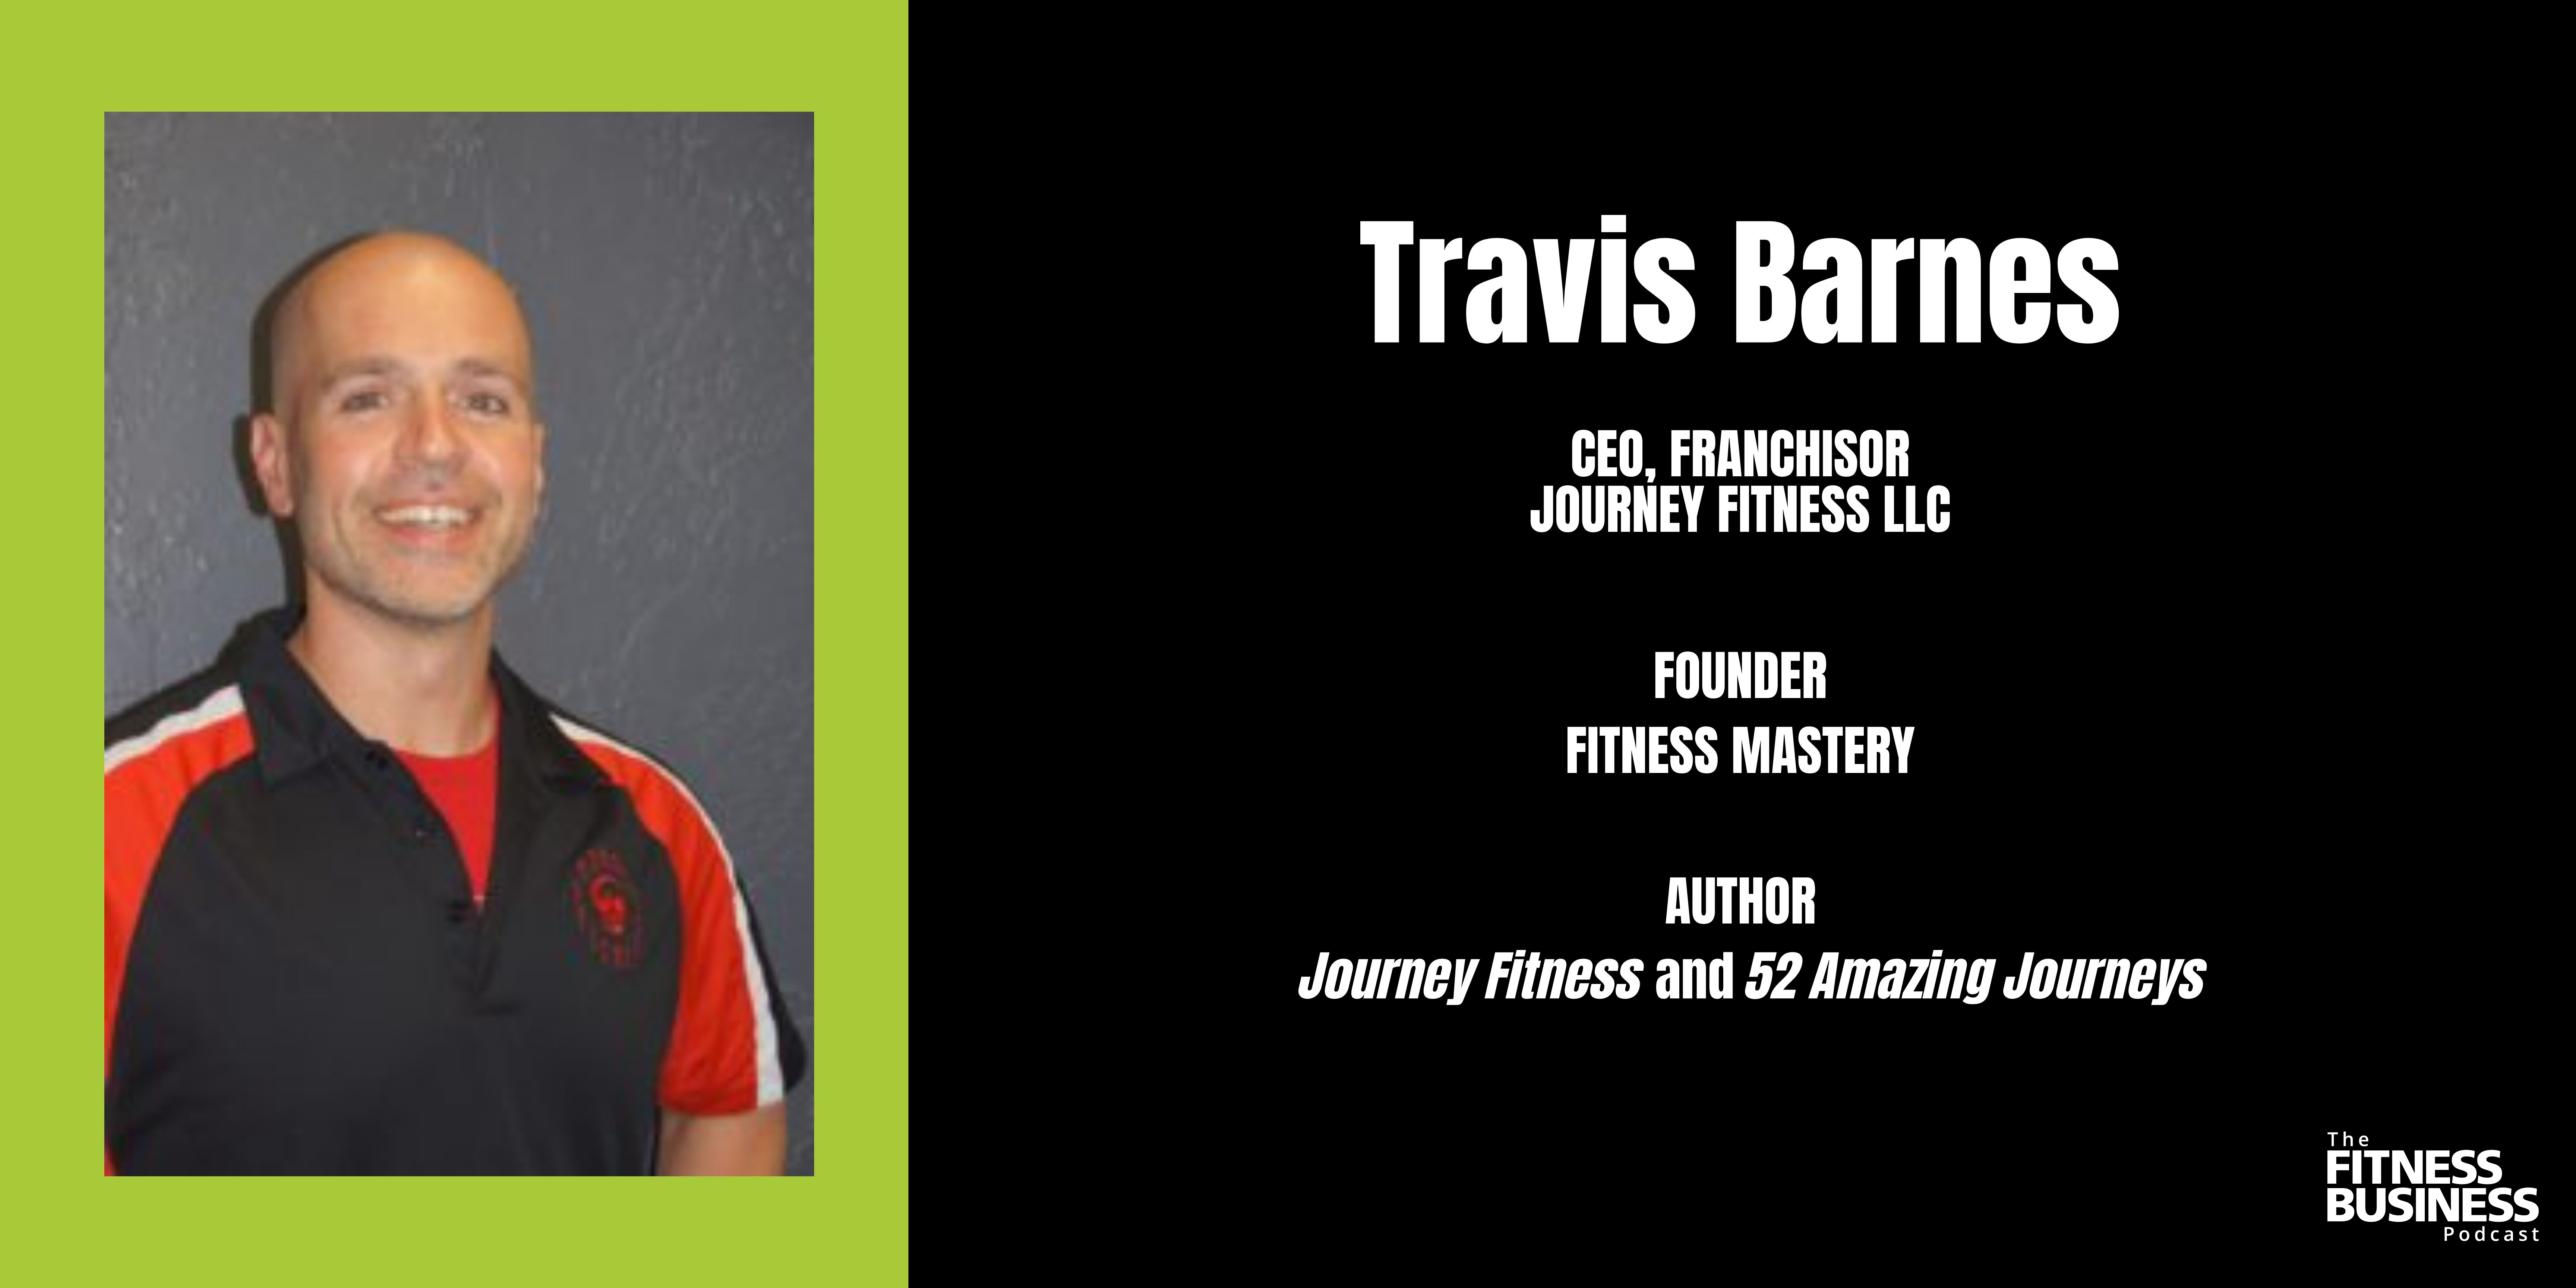 Pictured is Travis Barnes who is a CEO, franchisor, founder, author and presenter